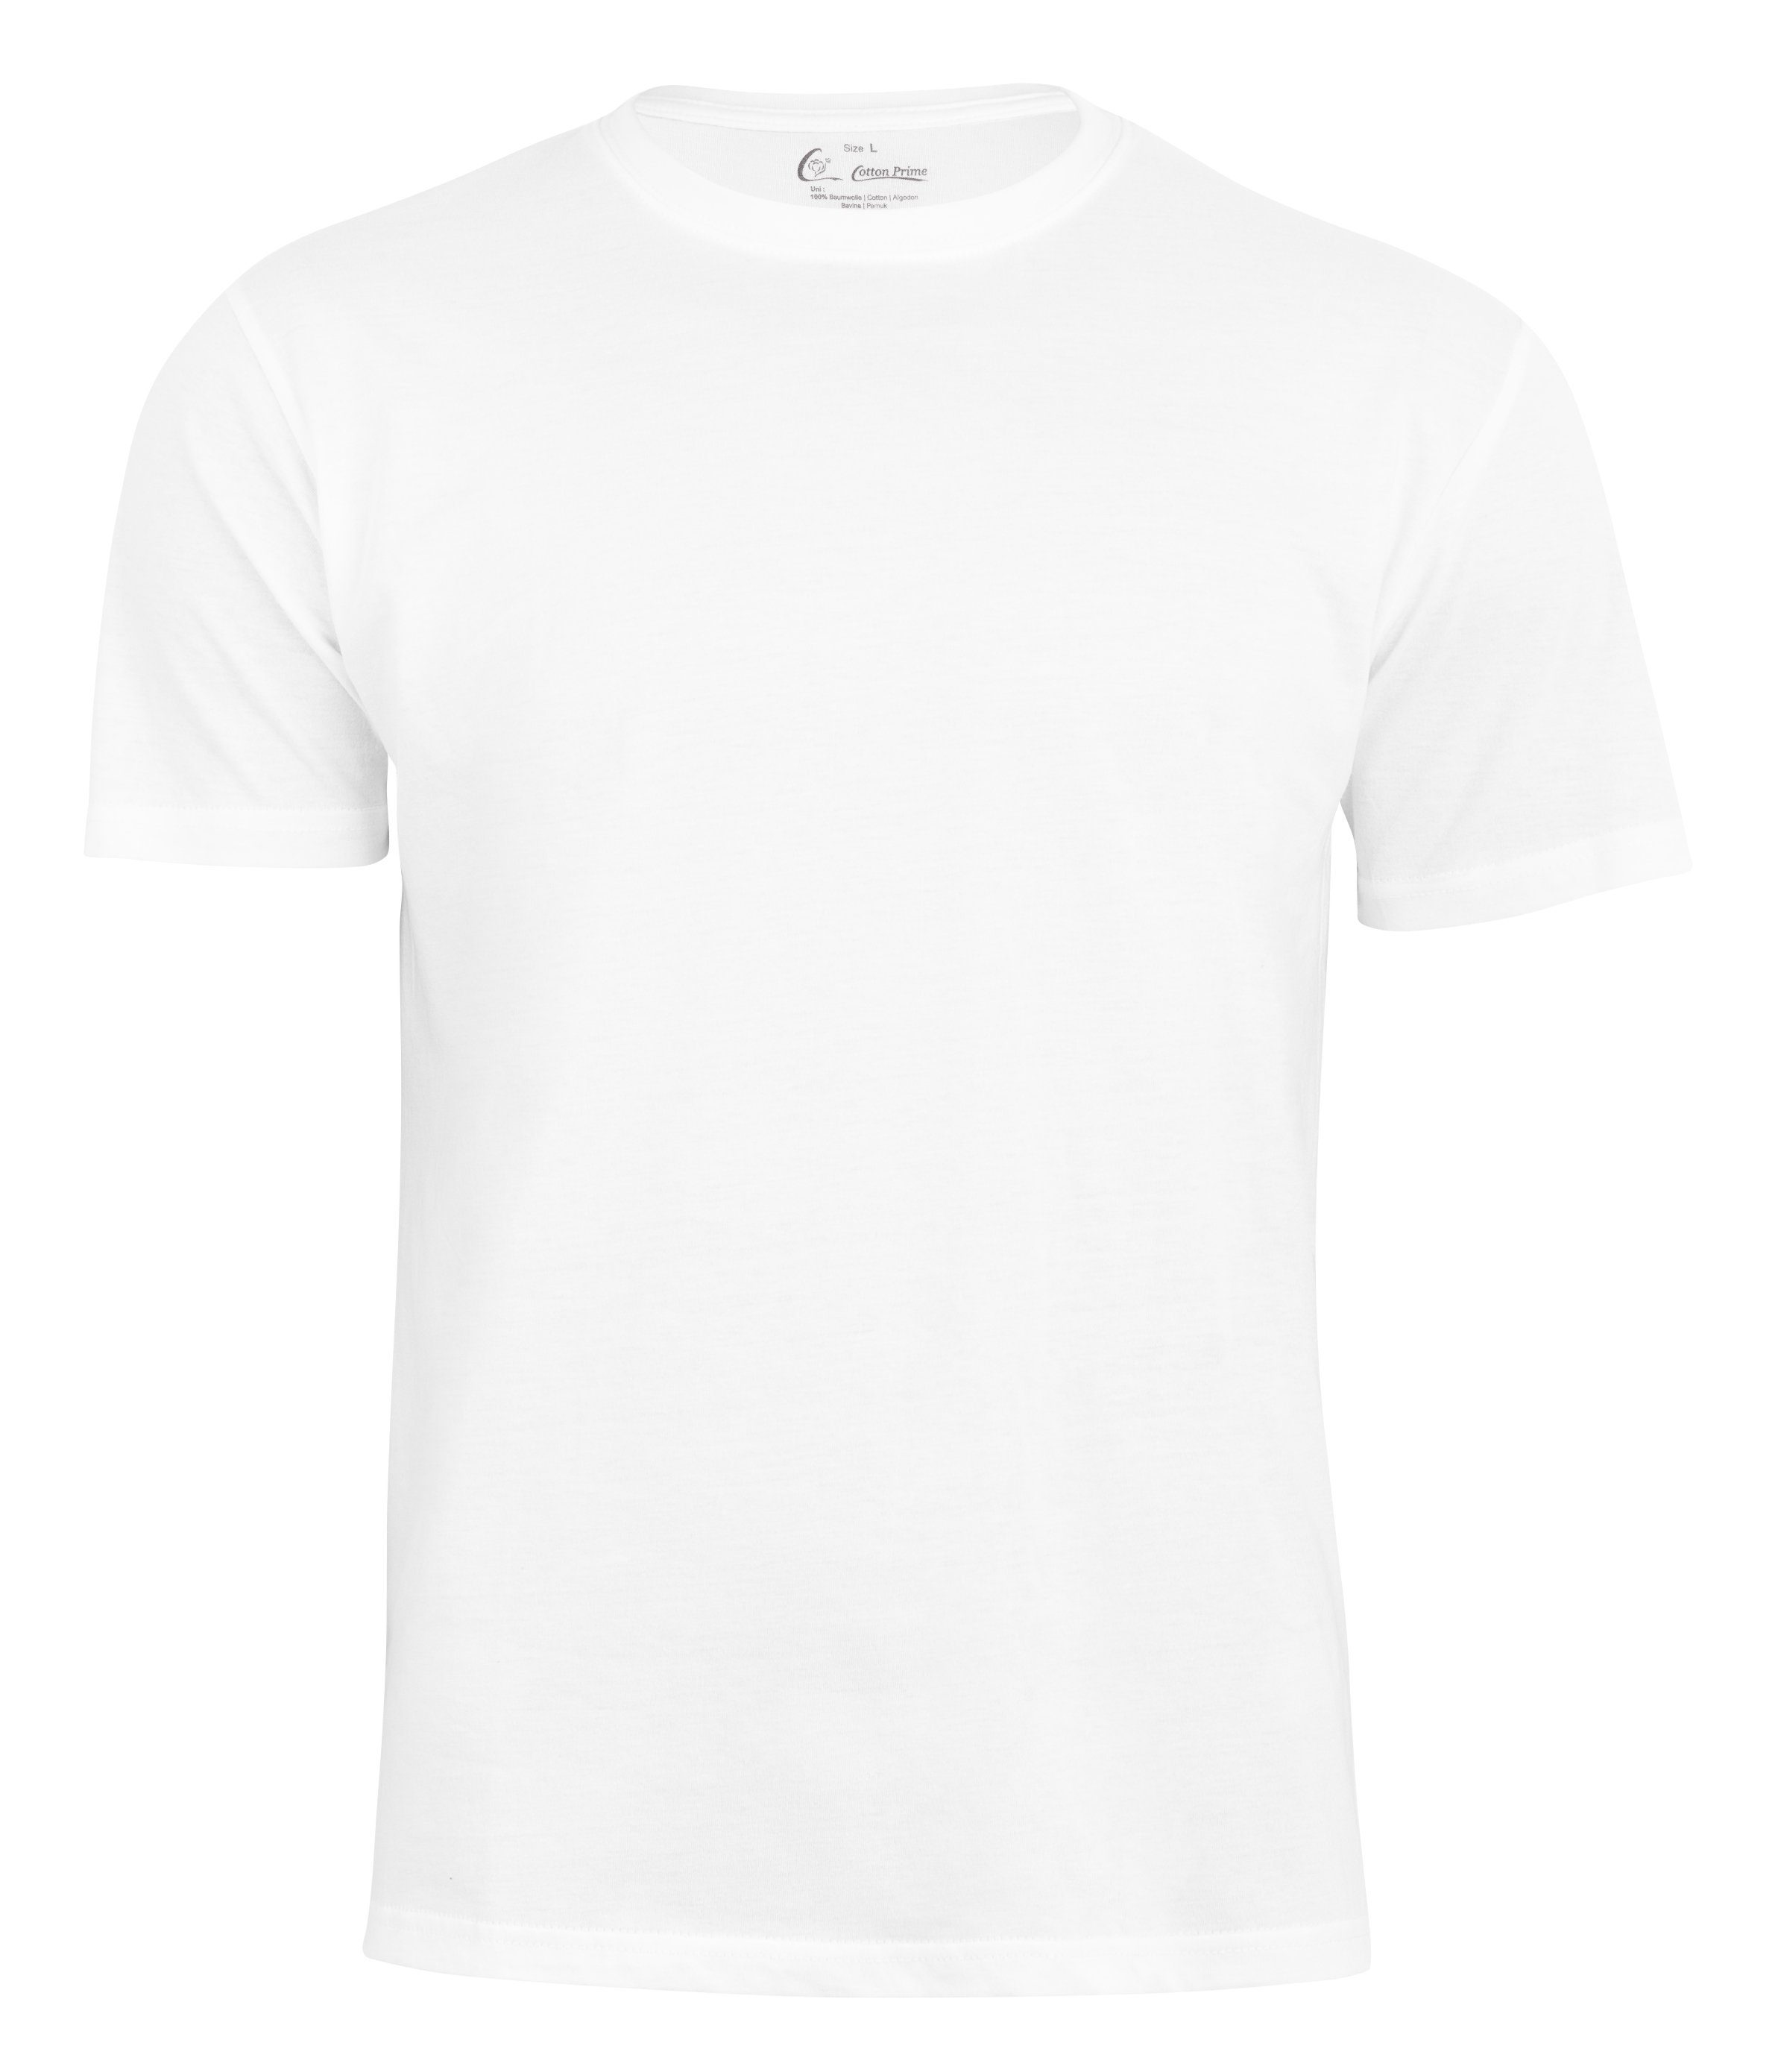 Tee Cotton T-Shirt Weiss Prime® - O-Neck